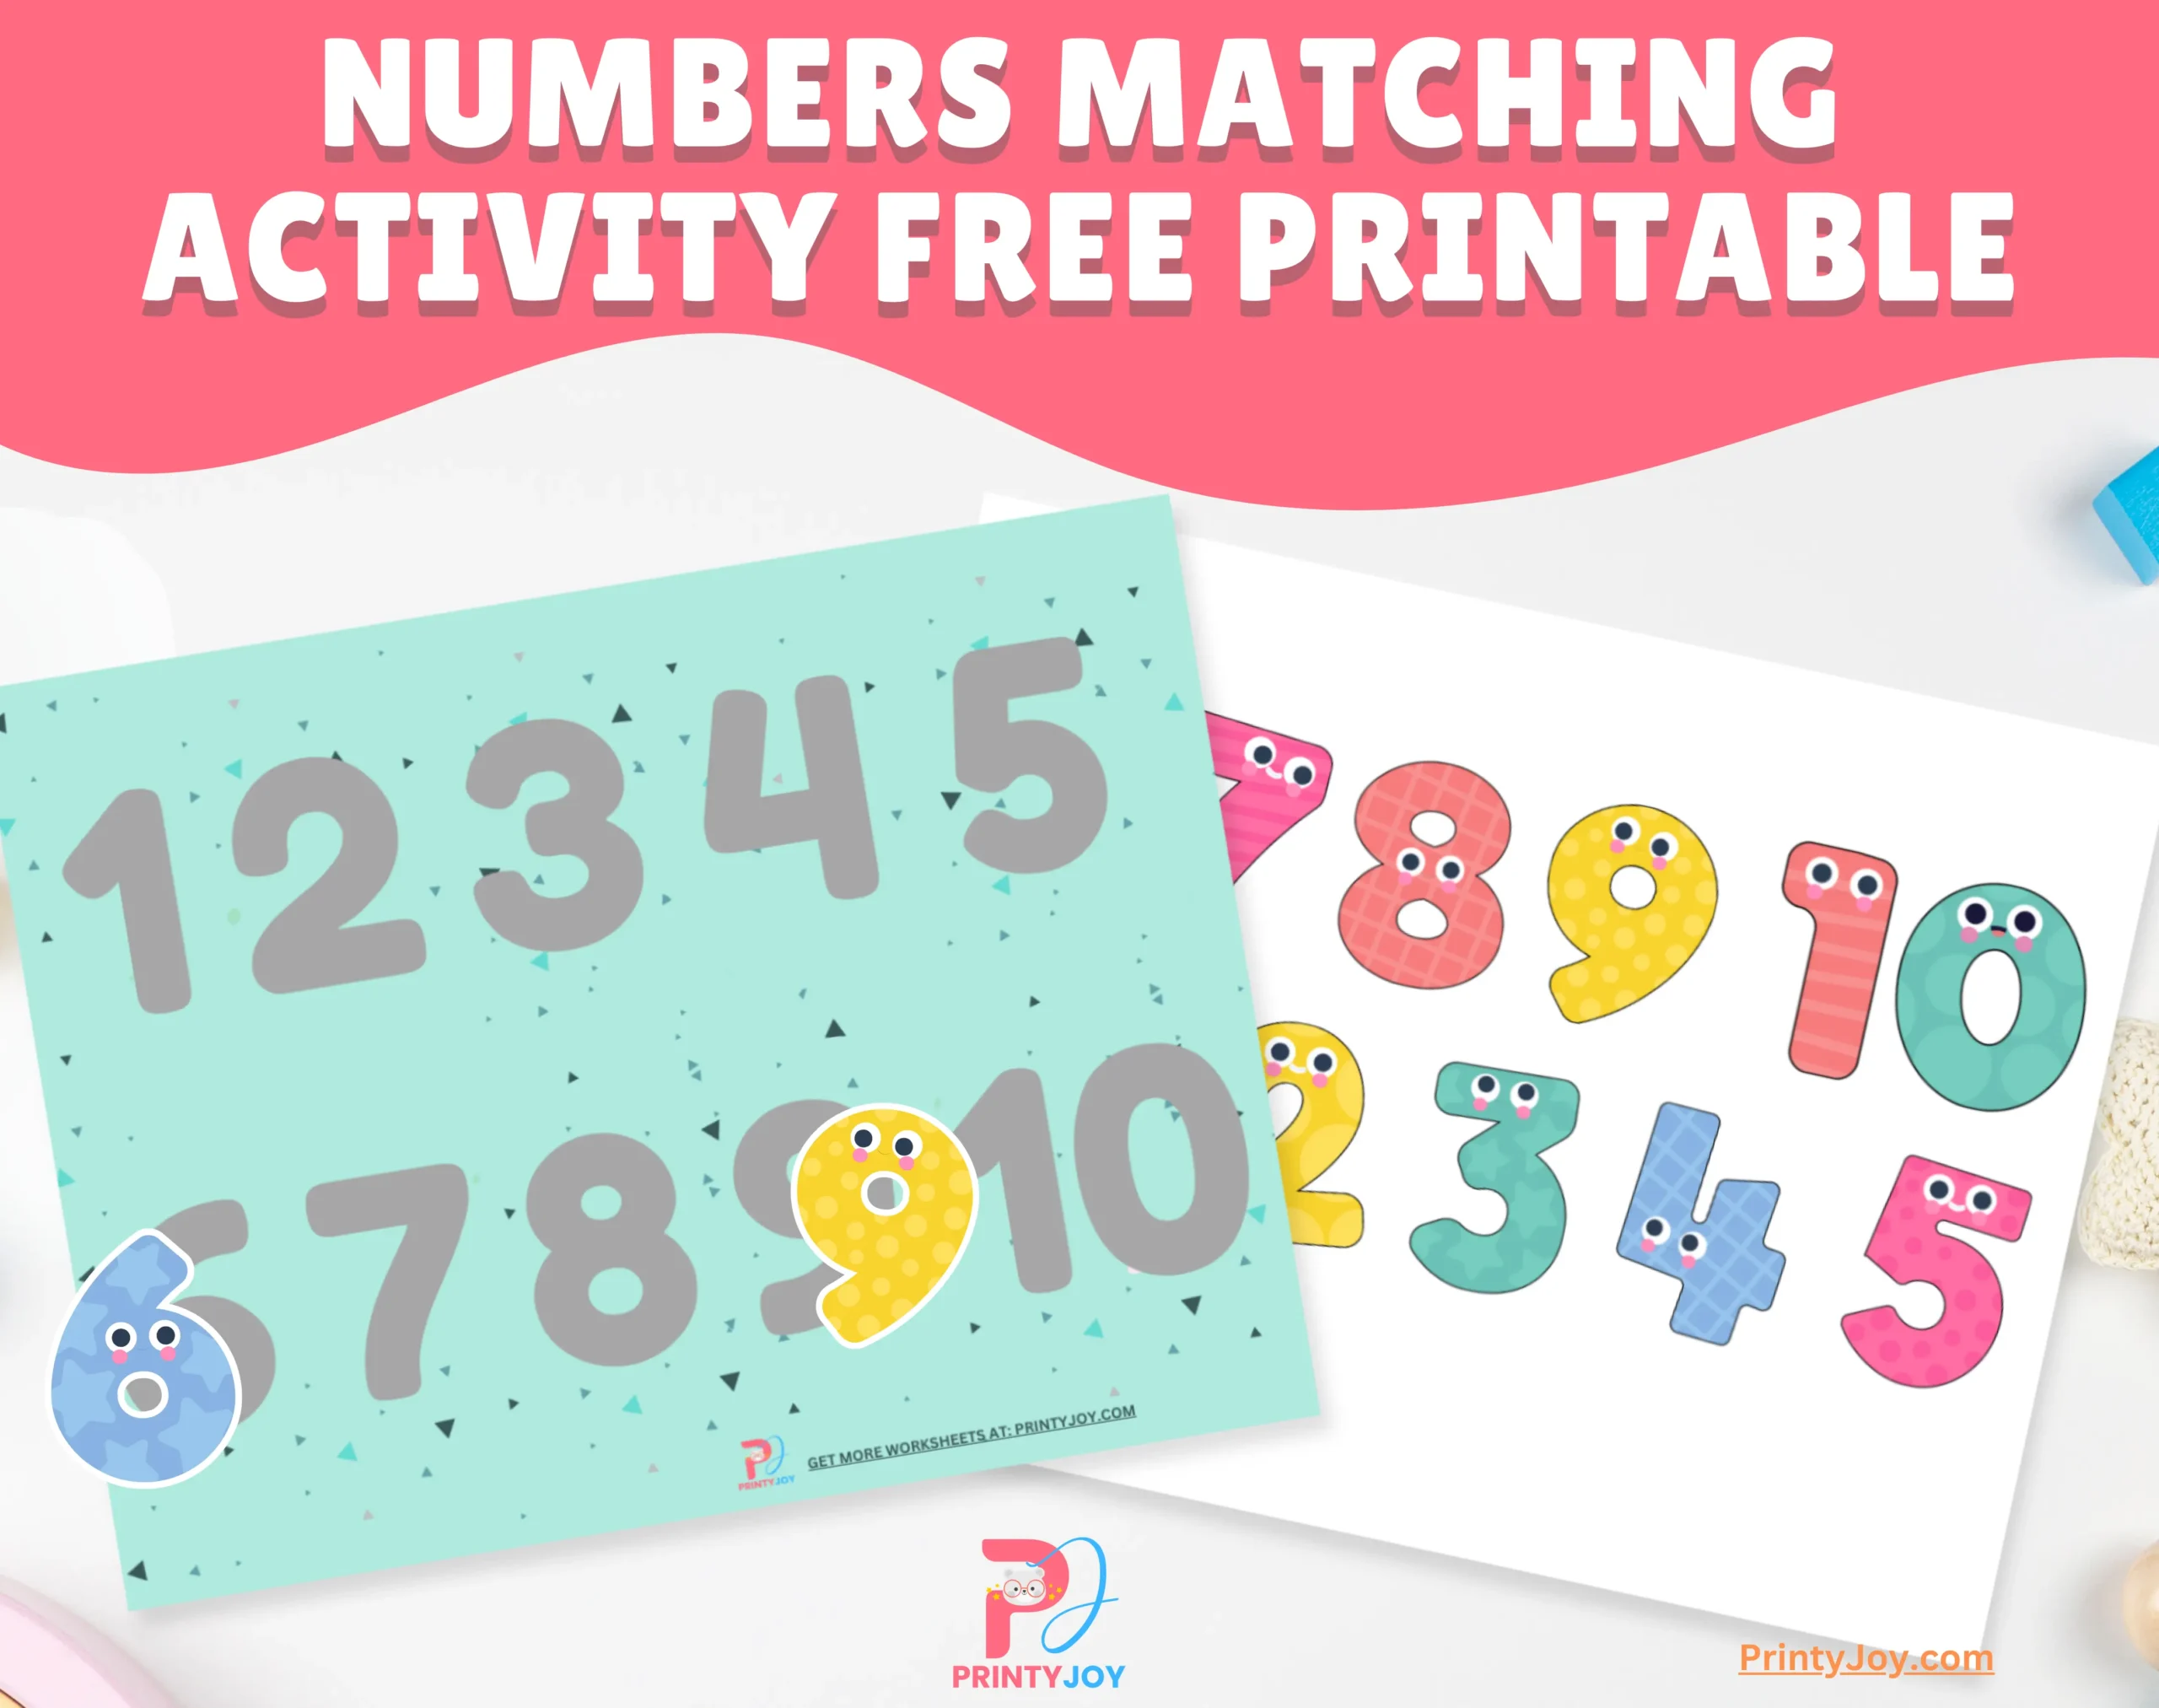 Numbers Matching Activity Free Printable